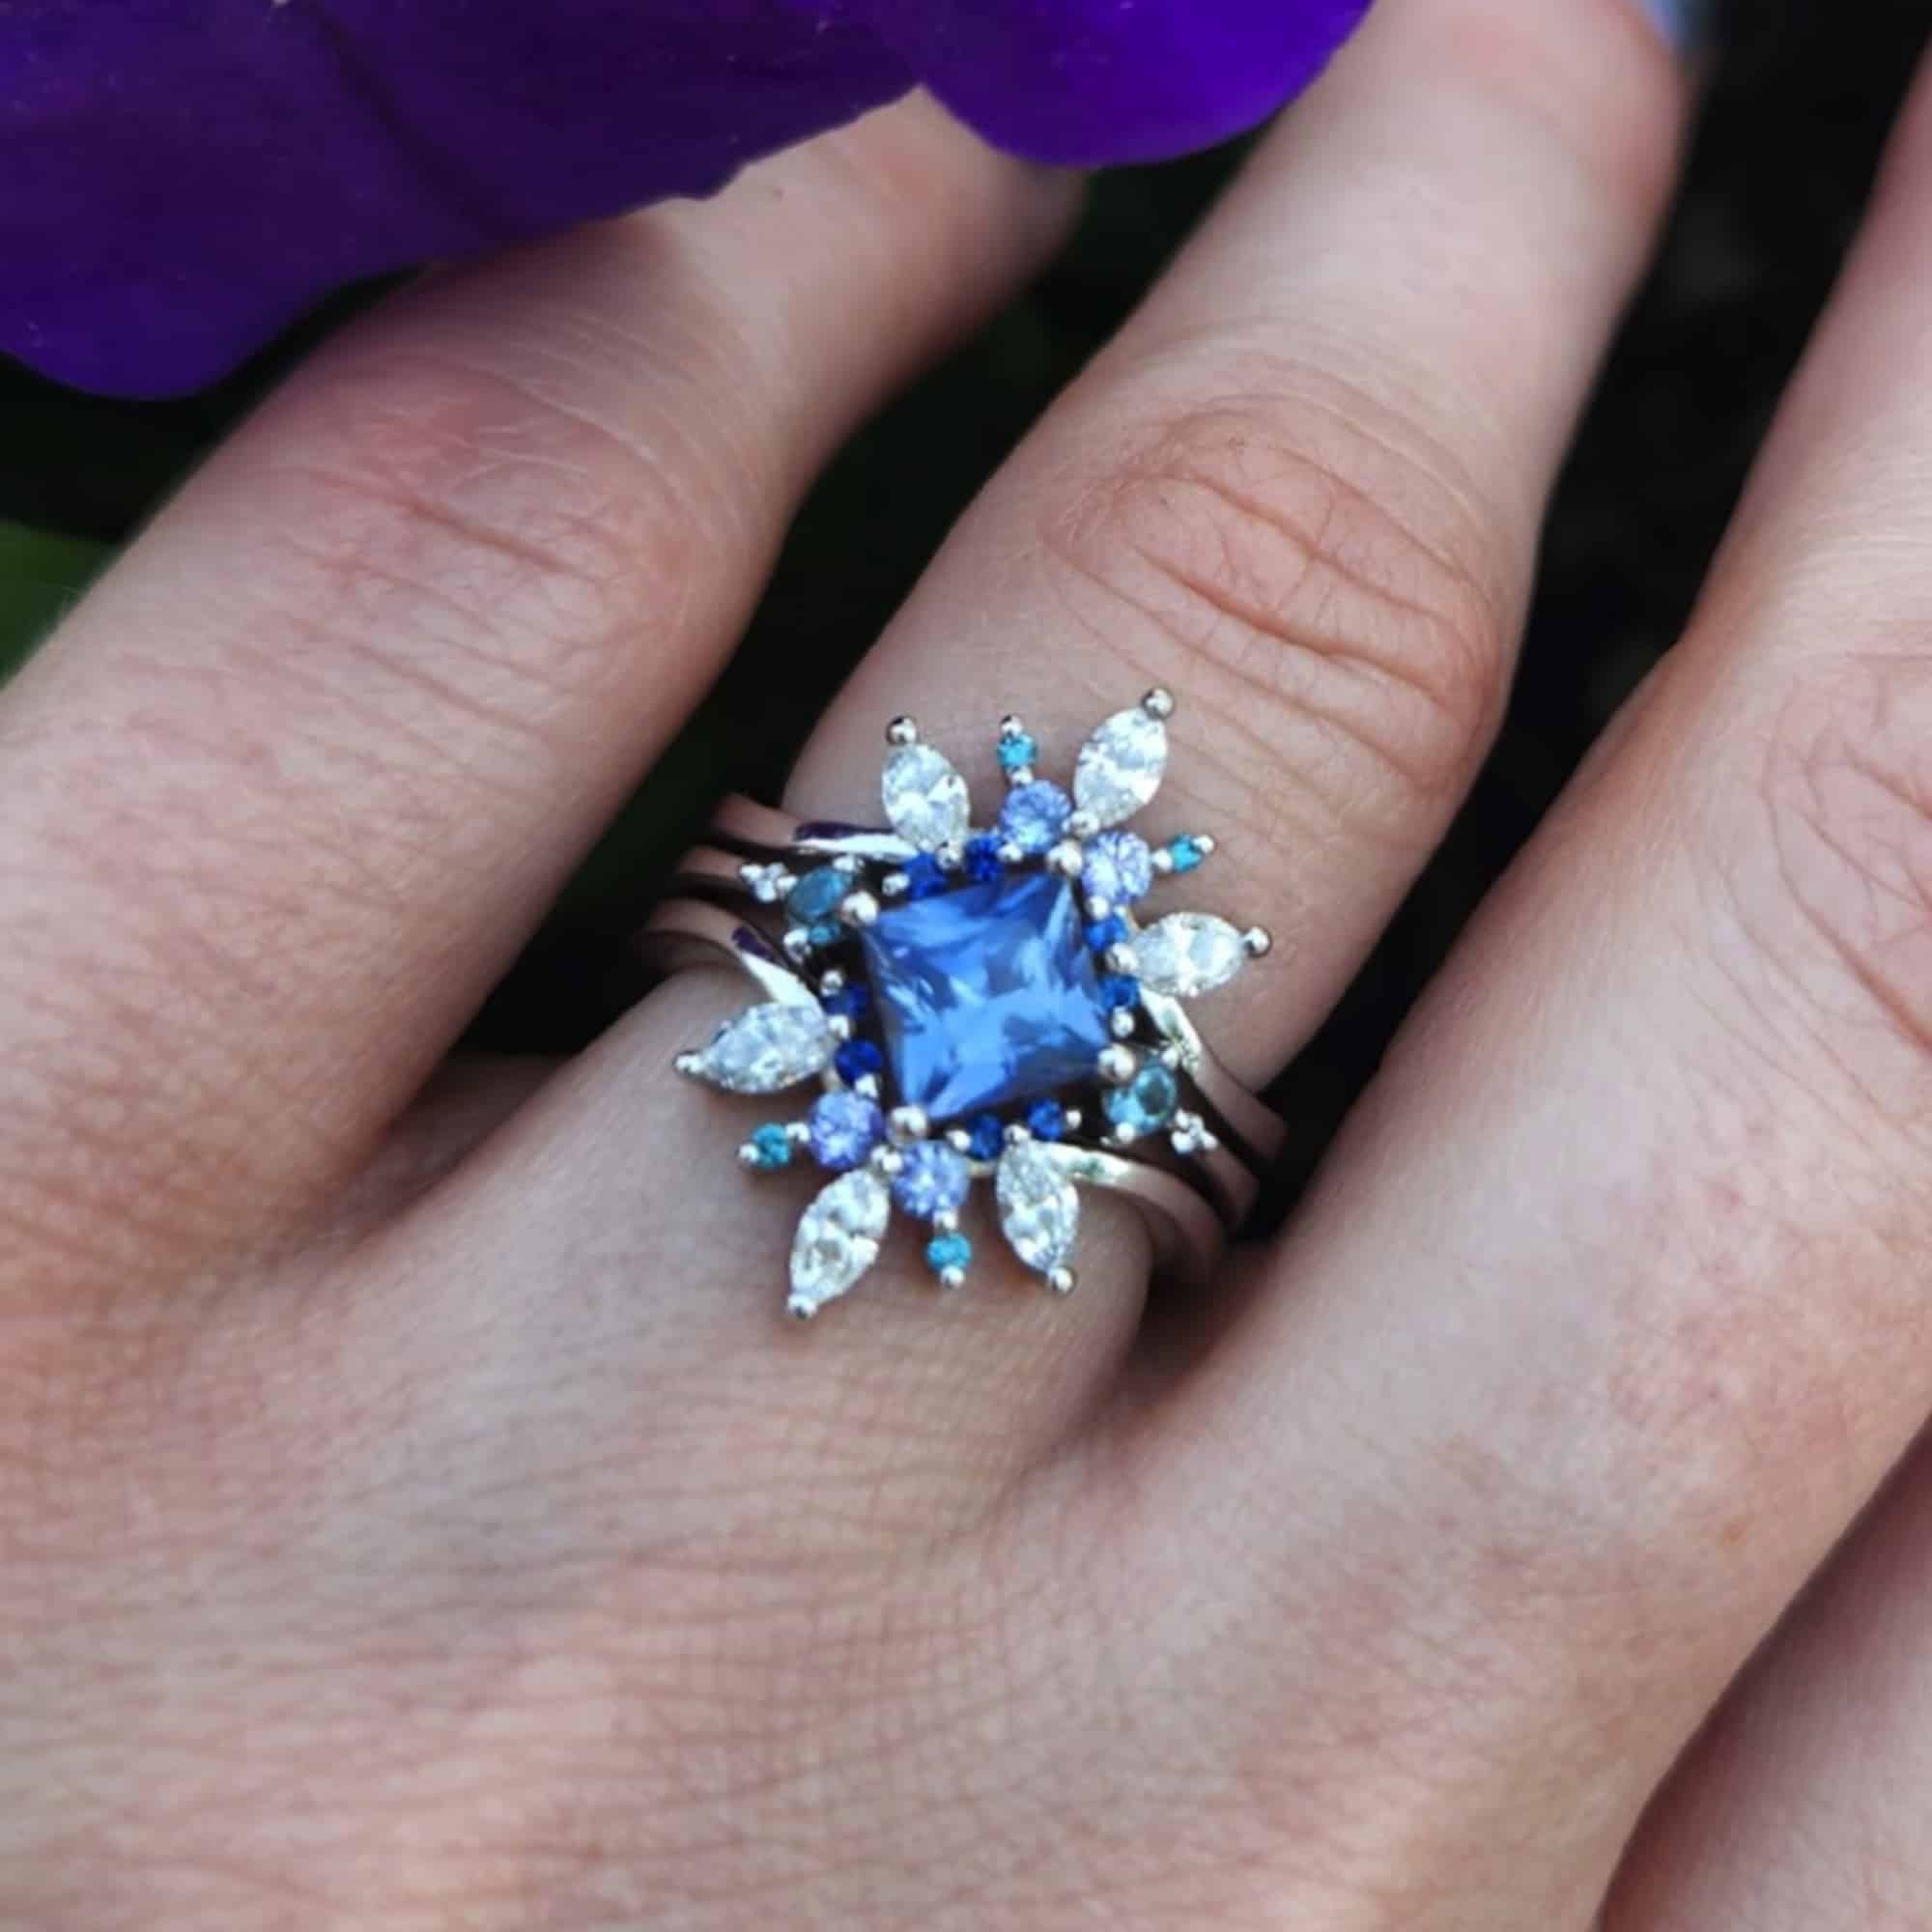 A photo from a customer review featuring a "Selene" ring with square blue sapphire and a "Selene" double band jacket on a hand against purple and pink flowers